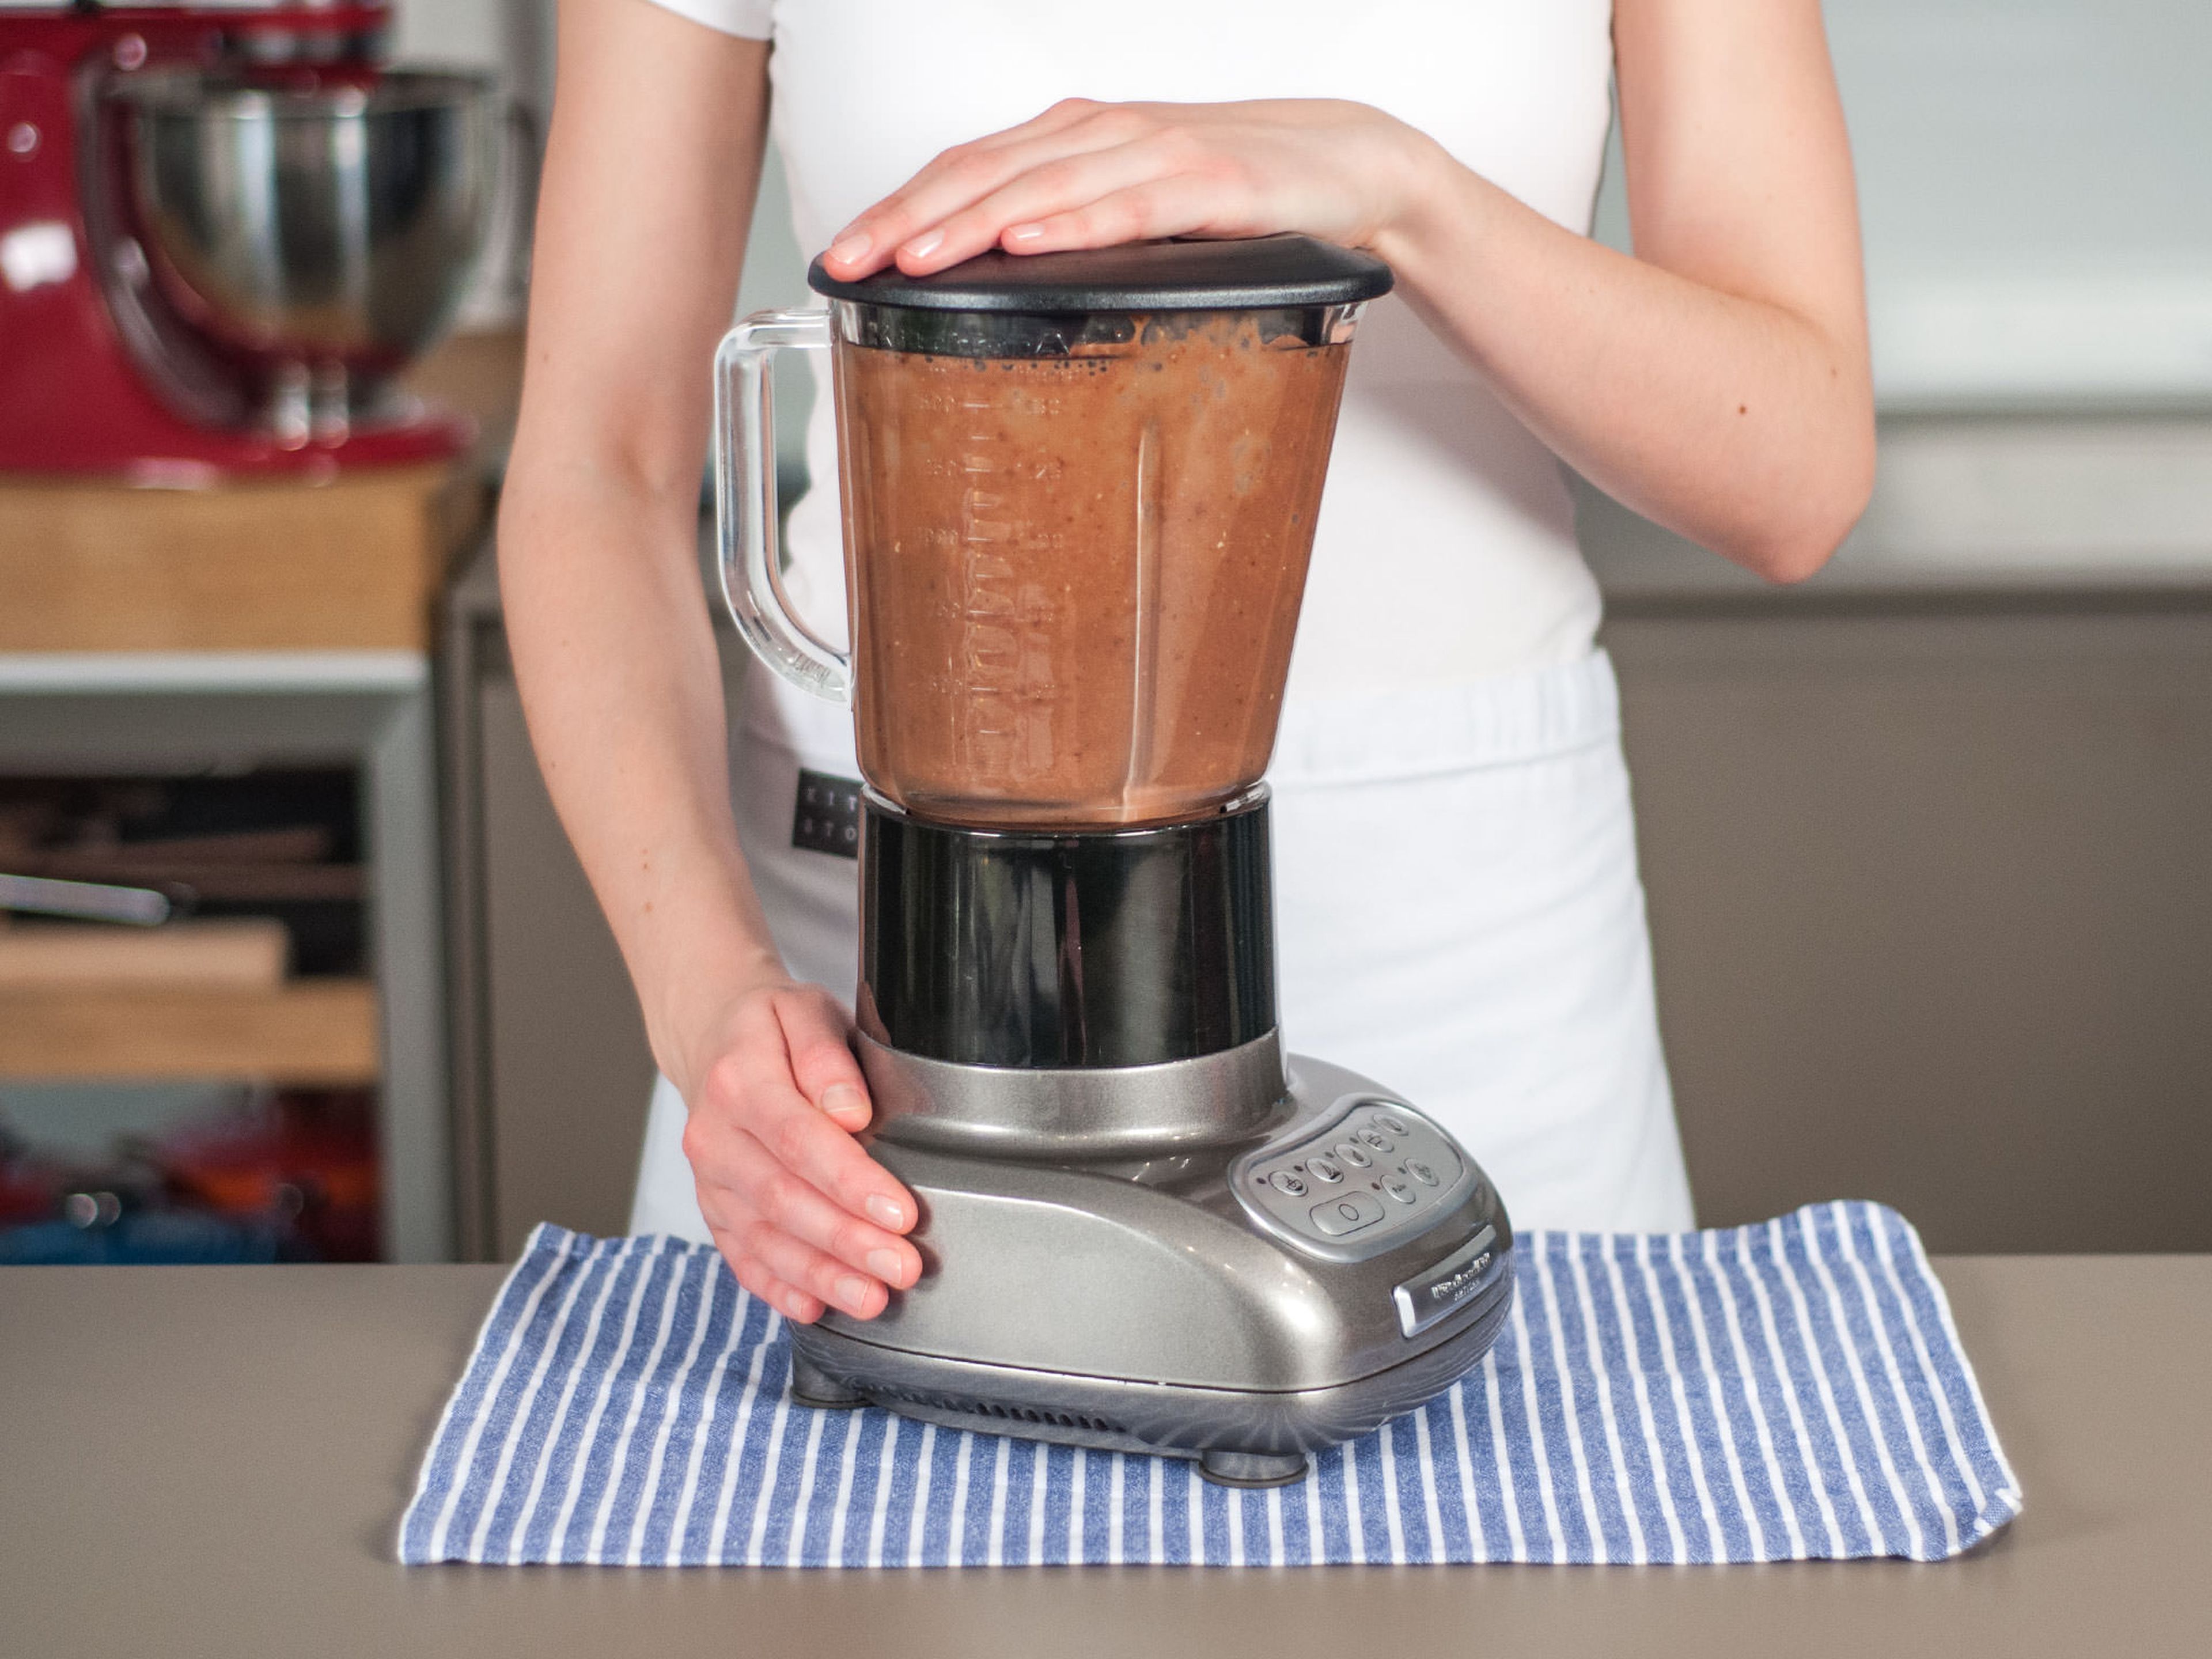 Blend on high speed for approx. 2 – 3 min. until creamy and smooth. Enjoy for breakfast or as a healthy snack.